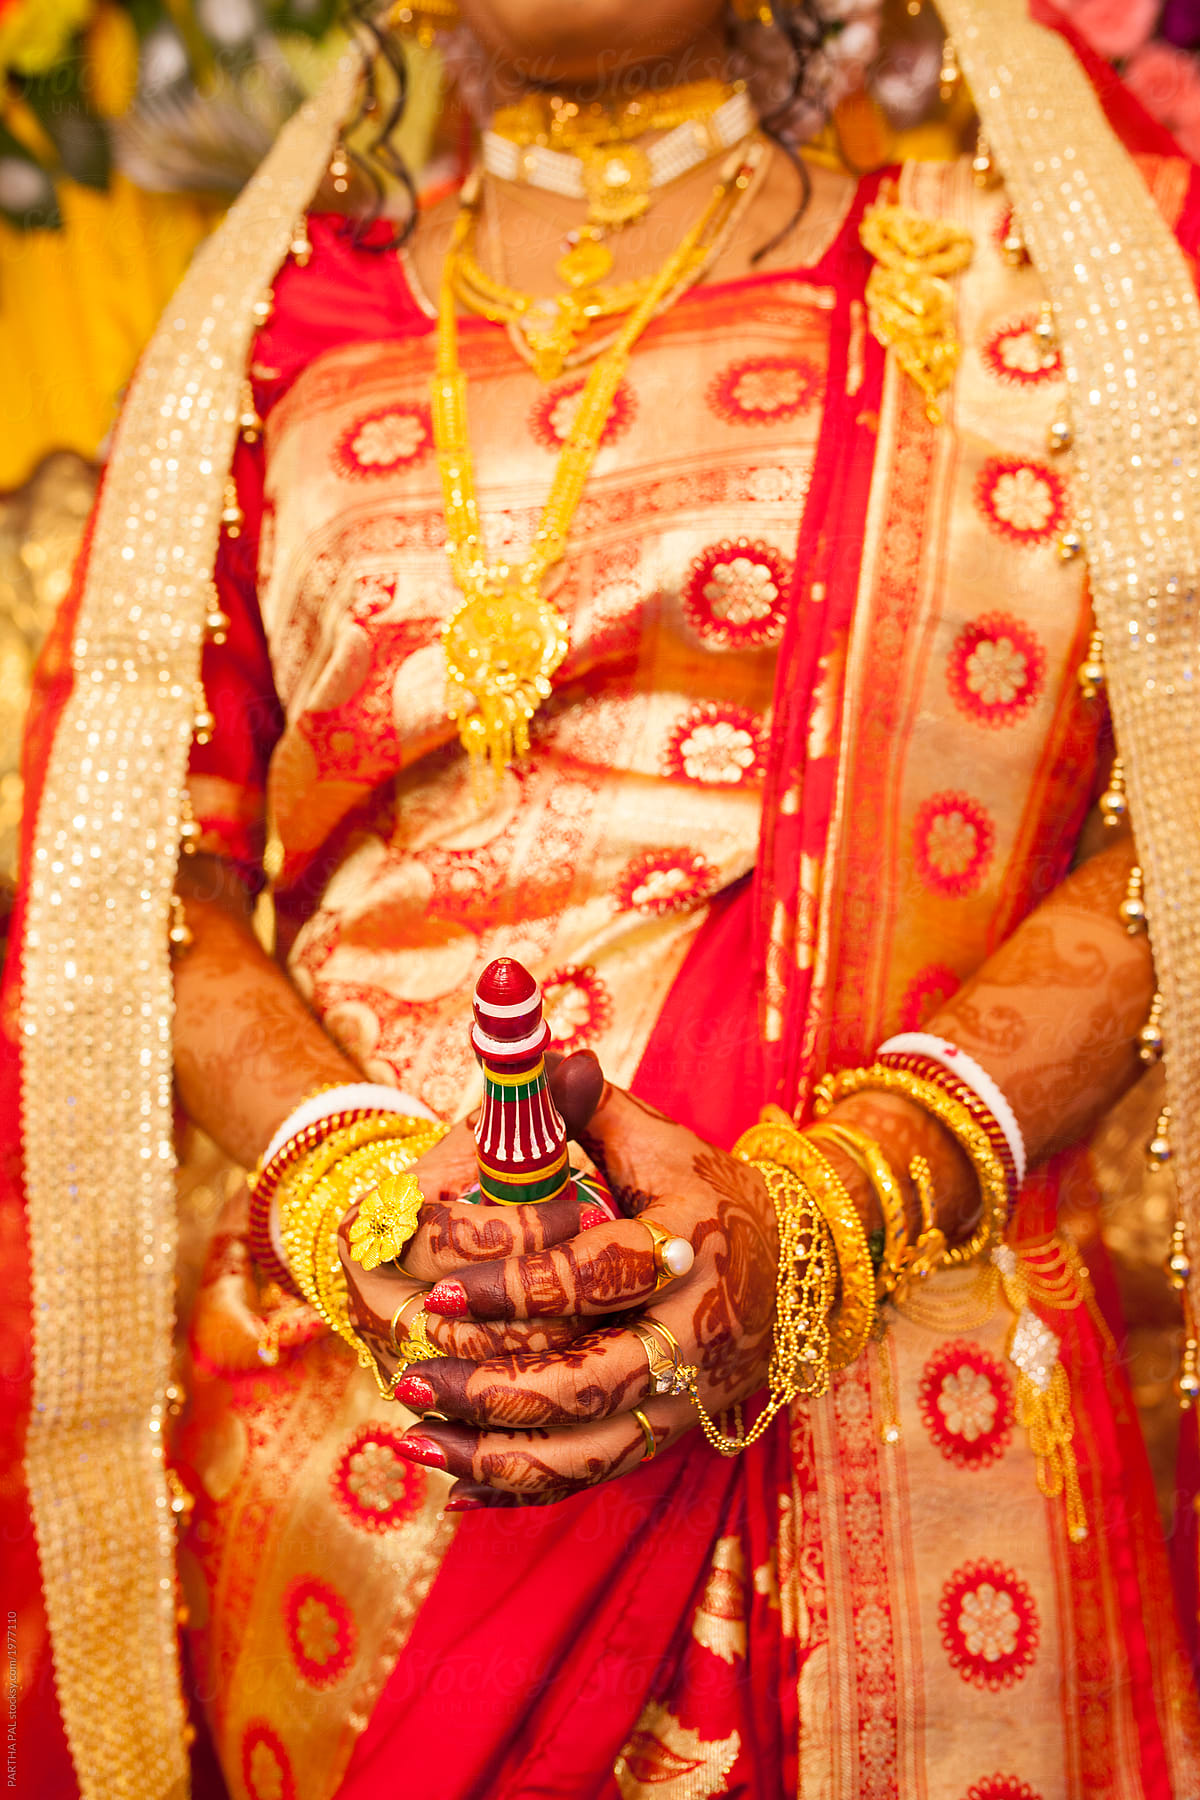 Decorative hands smudged with Mehendi  of a Hindu Bride in marriage ceremony